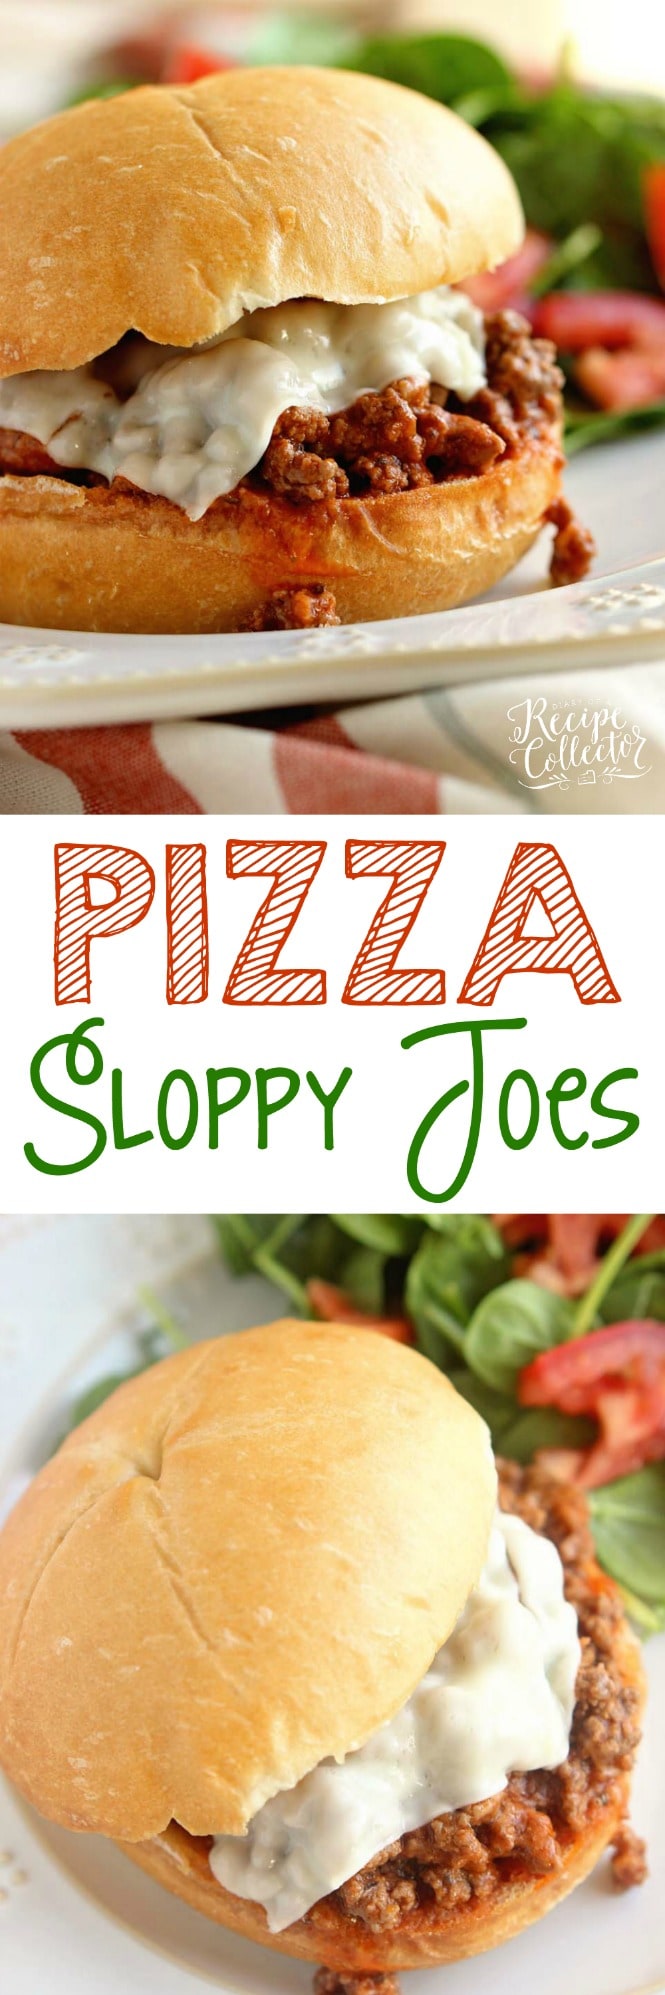 Pizza Sloppy Joes - A delicious homemade sloppy joe with all the flavor of pizza! It's a quick and easy 30 minute dinner recipe perfect for busy families!